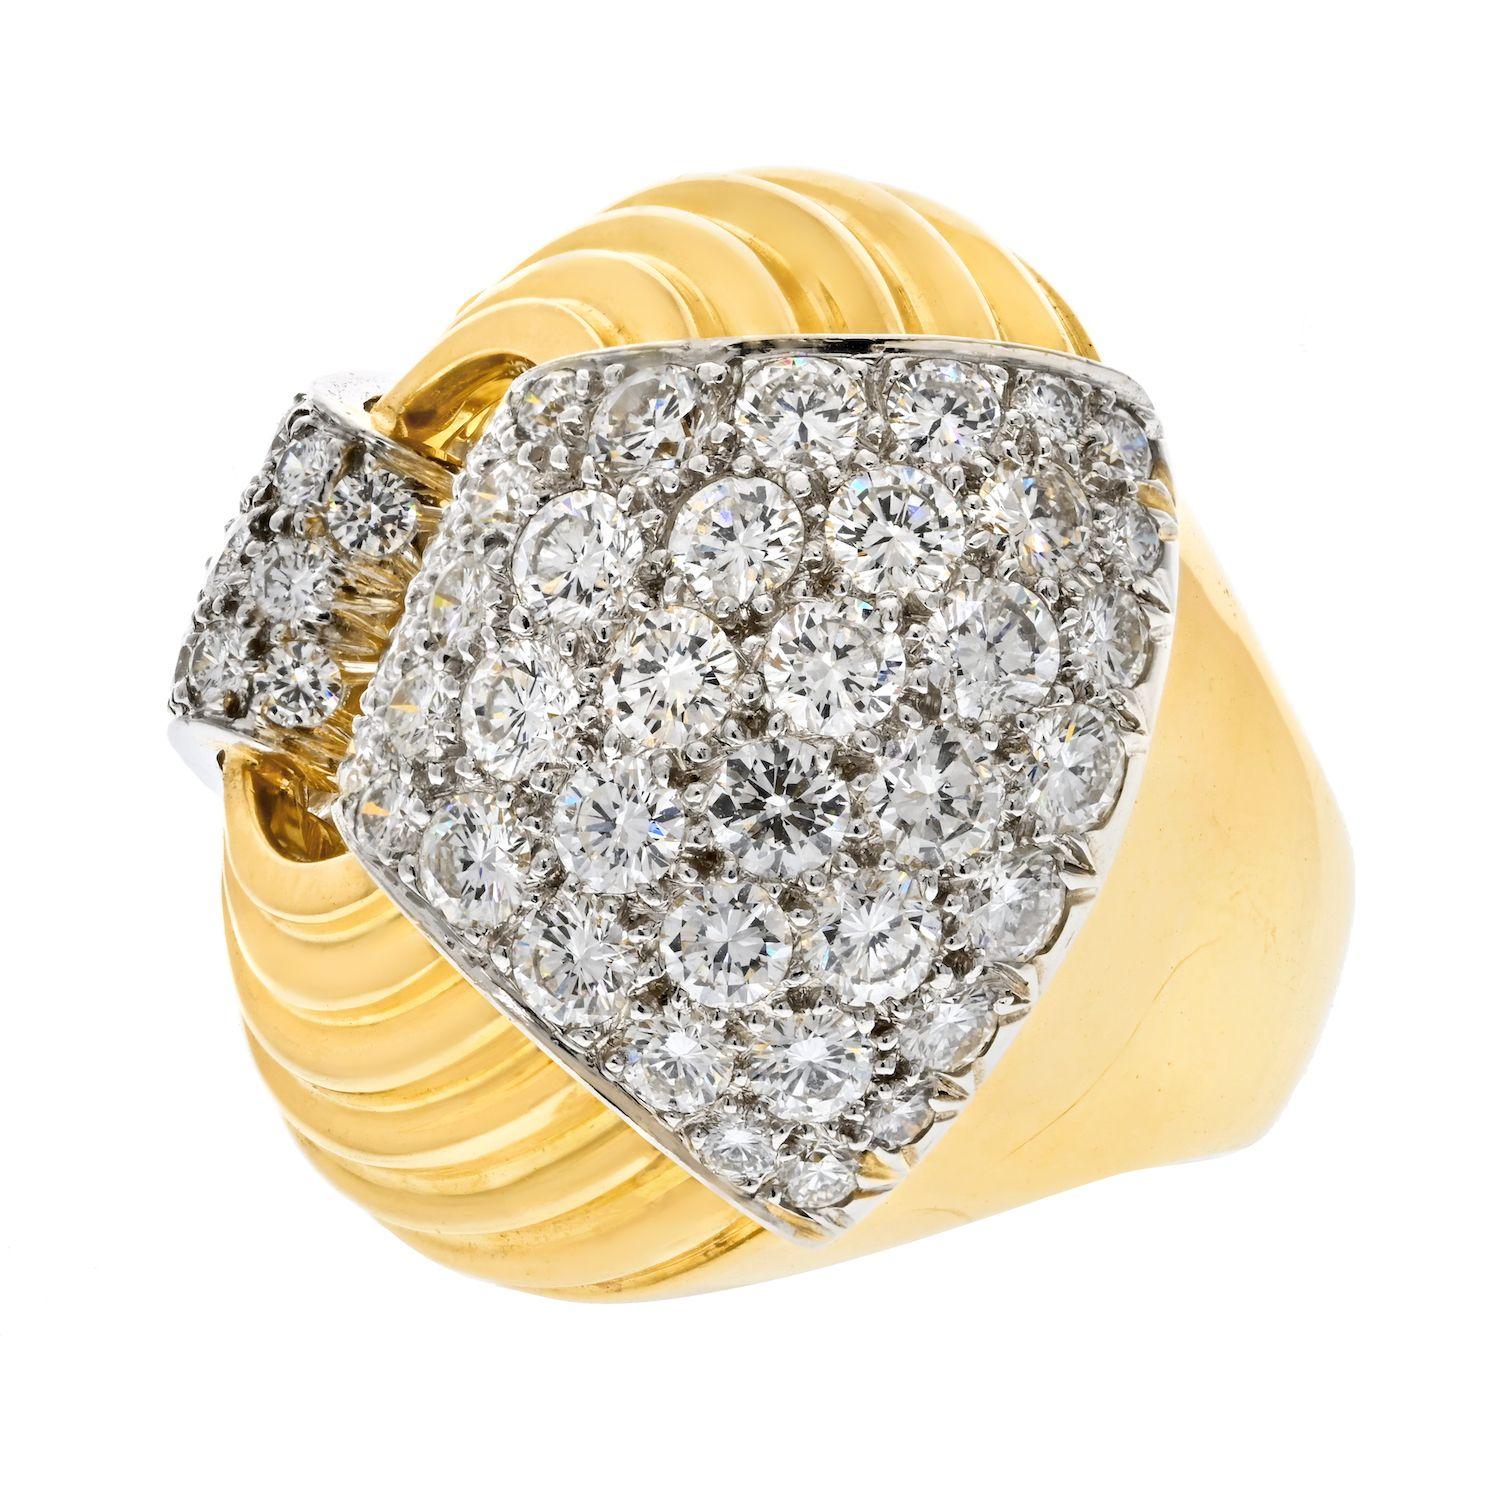 This David Webb 18K Yellow Gold Fluted Diamond Cocktail Ring is a stunning and luxurious piece that offers both elegance and a touch of extravagance. Let's explore the details:

**Design and Craftsmanship:**
- **Fluted Pattern:**
  The fluted